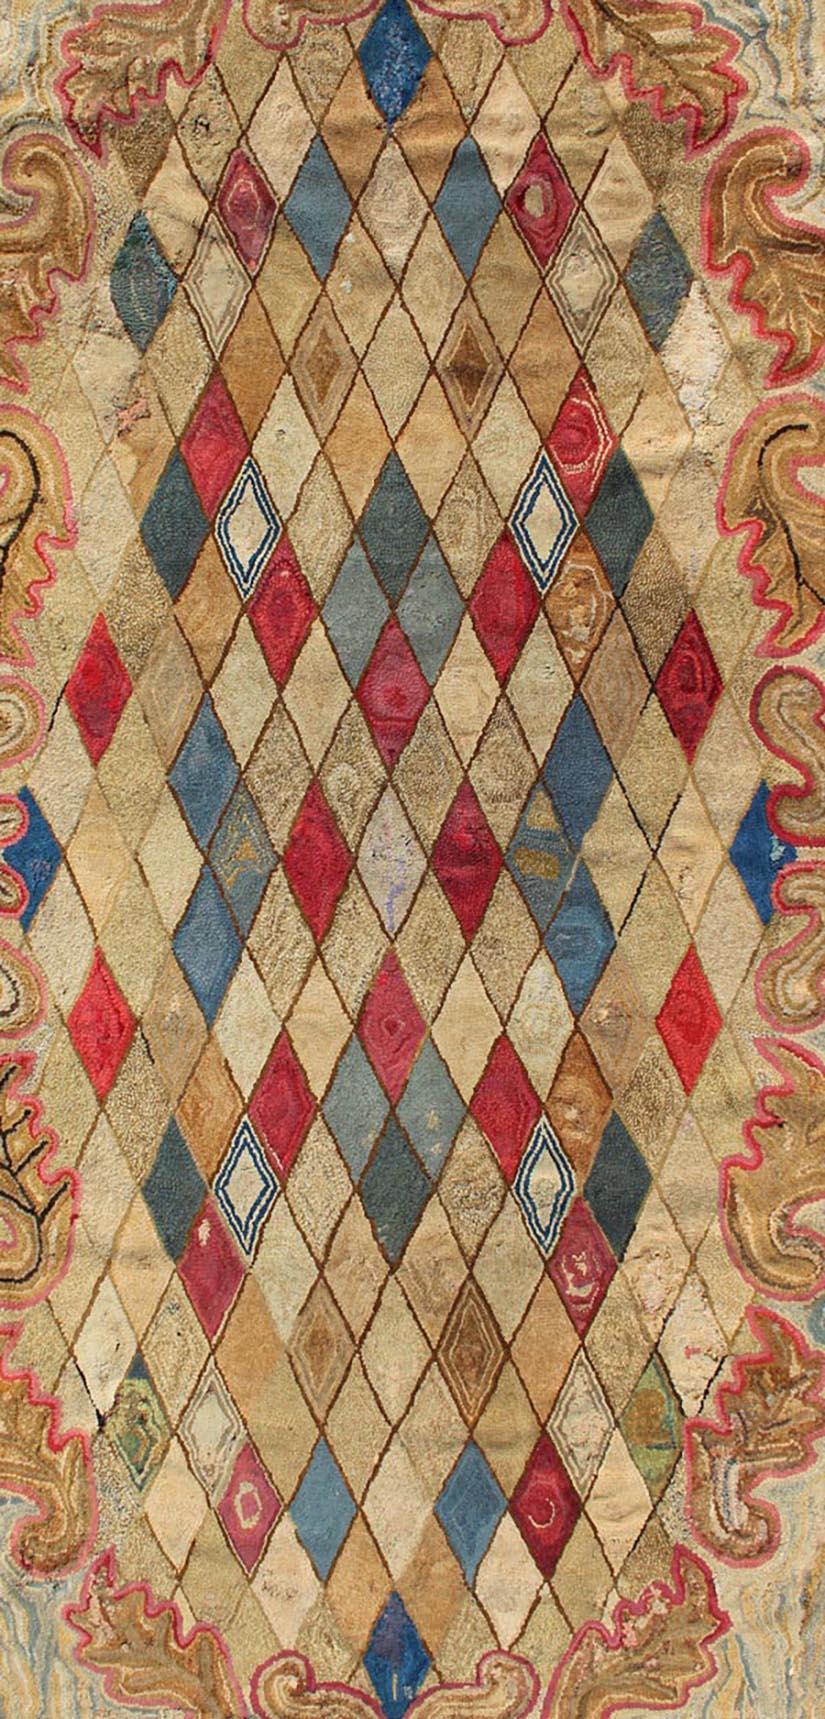 early american hooked rugs